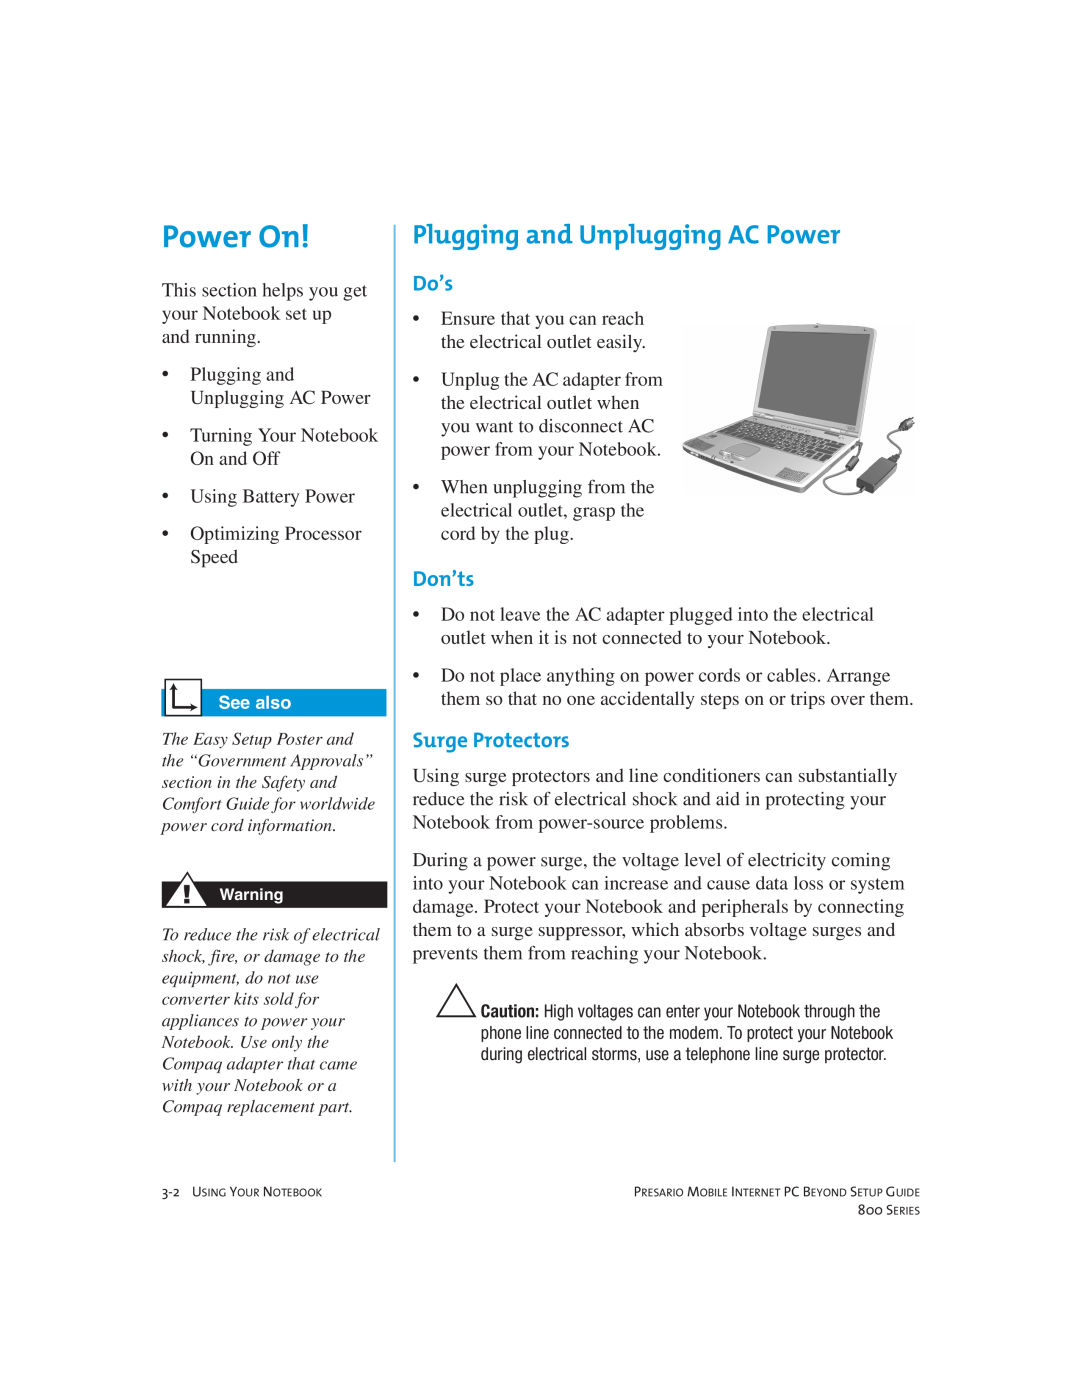 Compaq 800 manual Power On, Plugging and Unplugging AC Power, Do’s, Don’ts, Surge Protectors 